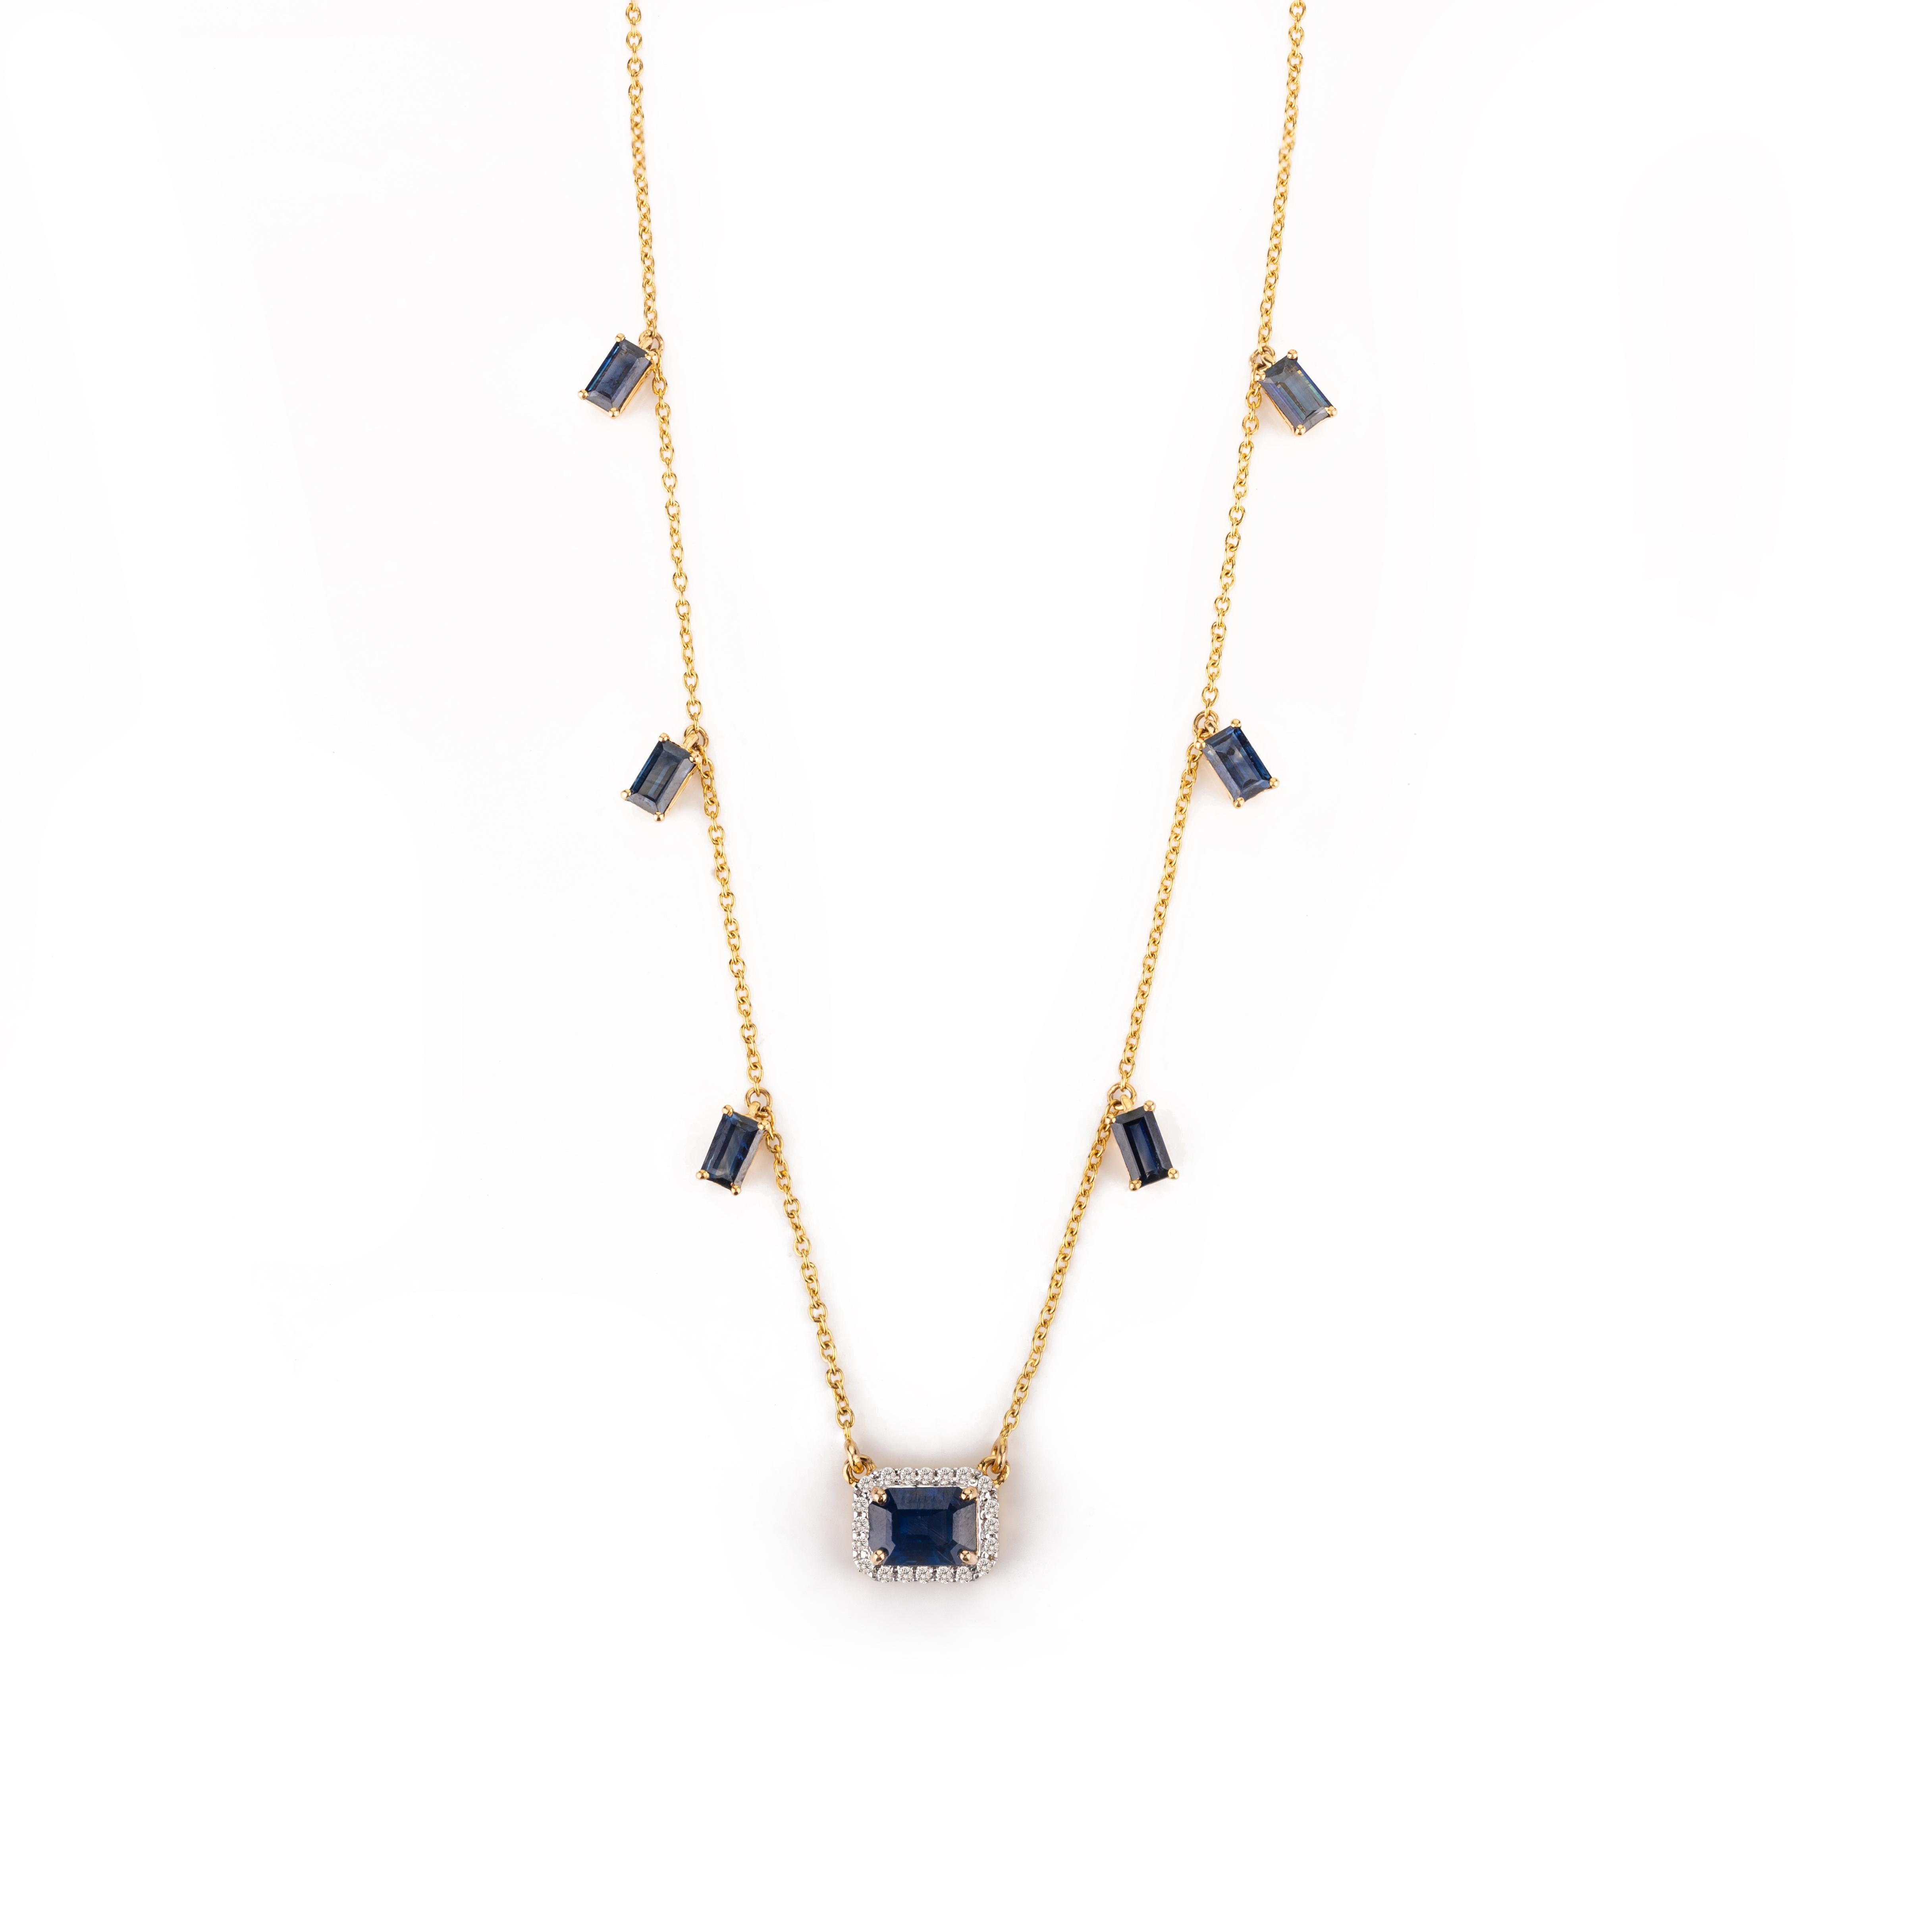 Women's Dangling Blue Sapphire Diamond 14k Yellow Gold Chain Necklace Gift for Her For Sale